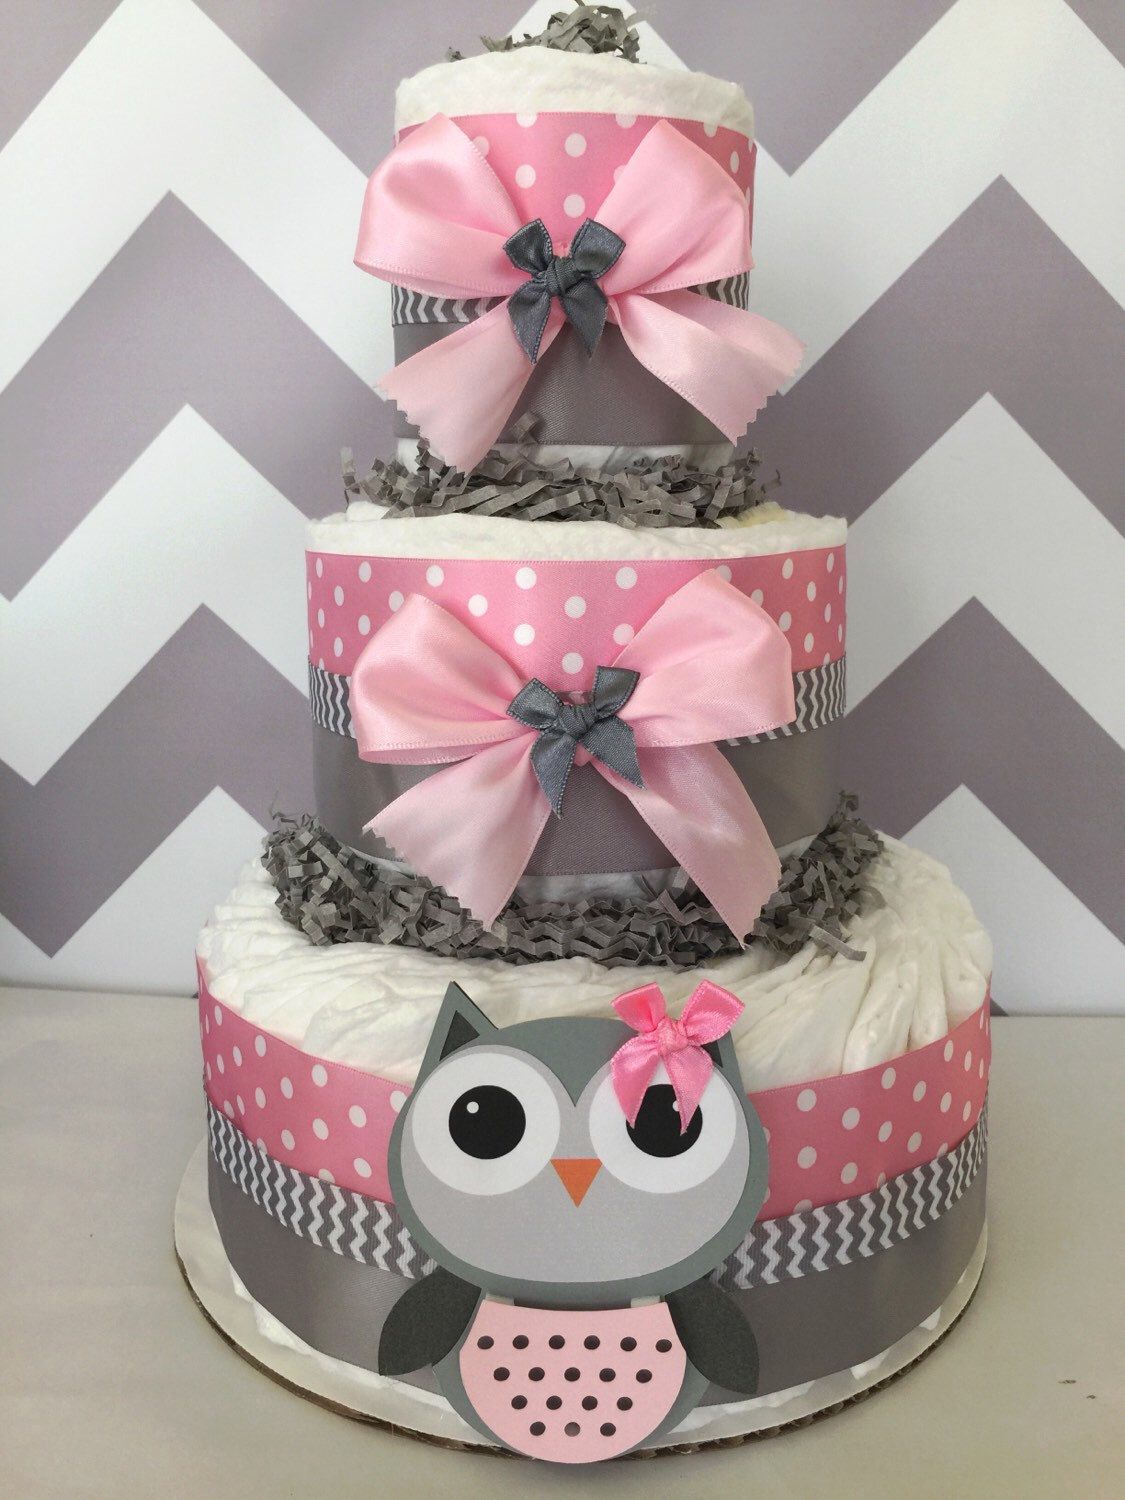 Owl Baby Shower Diaper Cake in Pink and Grey/Owl Baby Shower/Owl Centerpiece by AllDiaperCakes on Etsy www.etsy.com/…